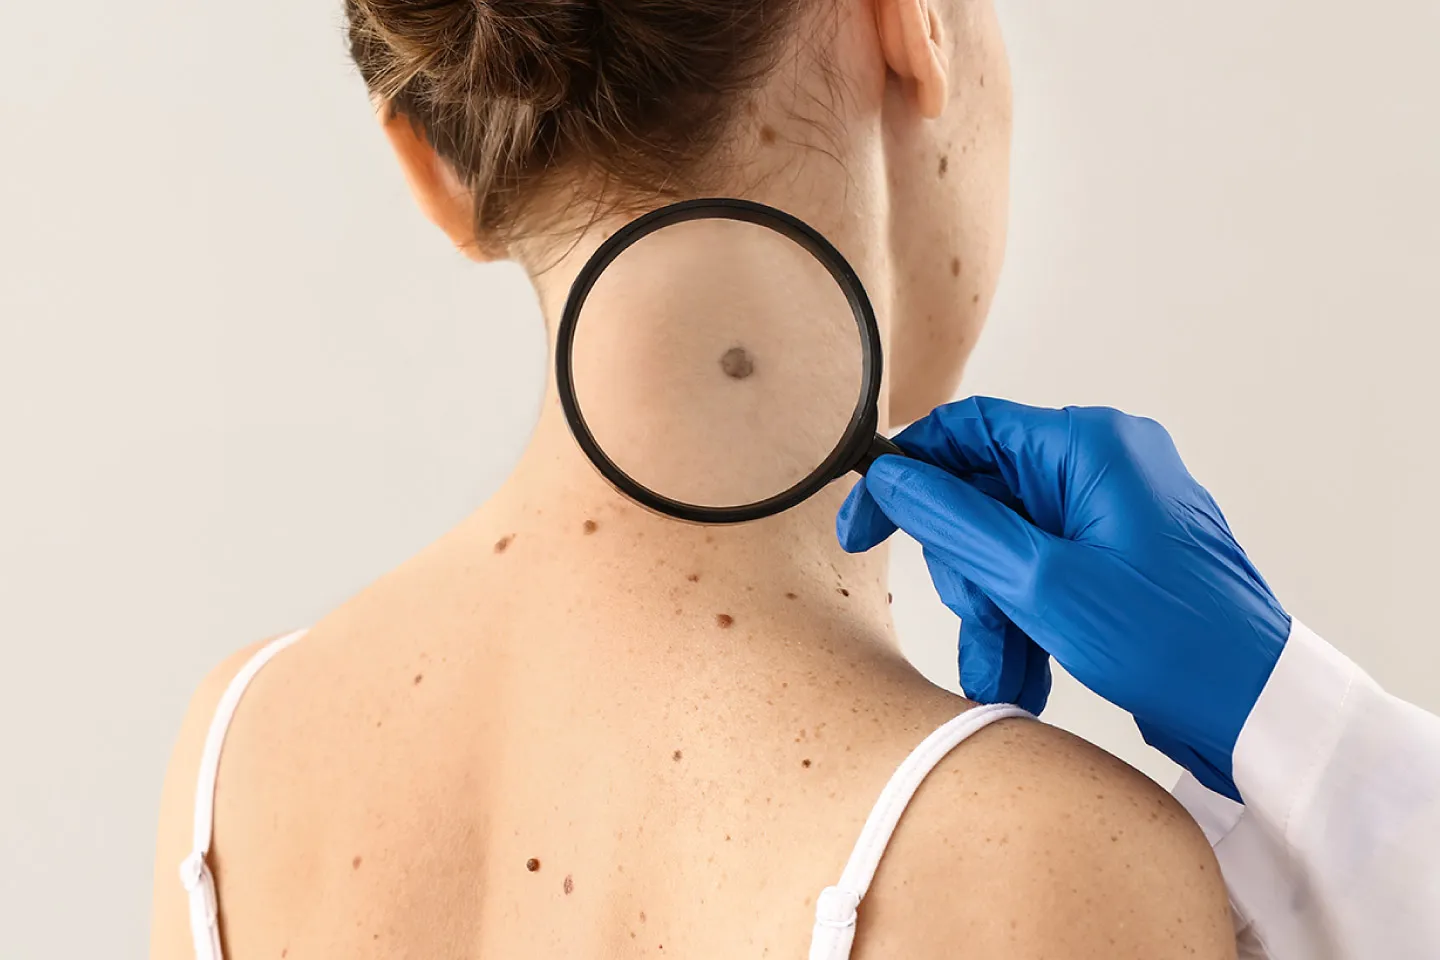 Patient suffer from malignant melanoma having moles on her body